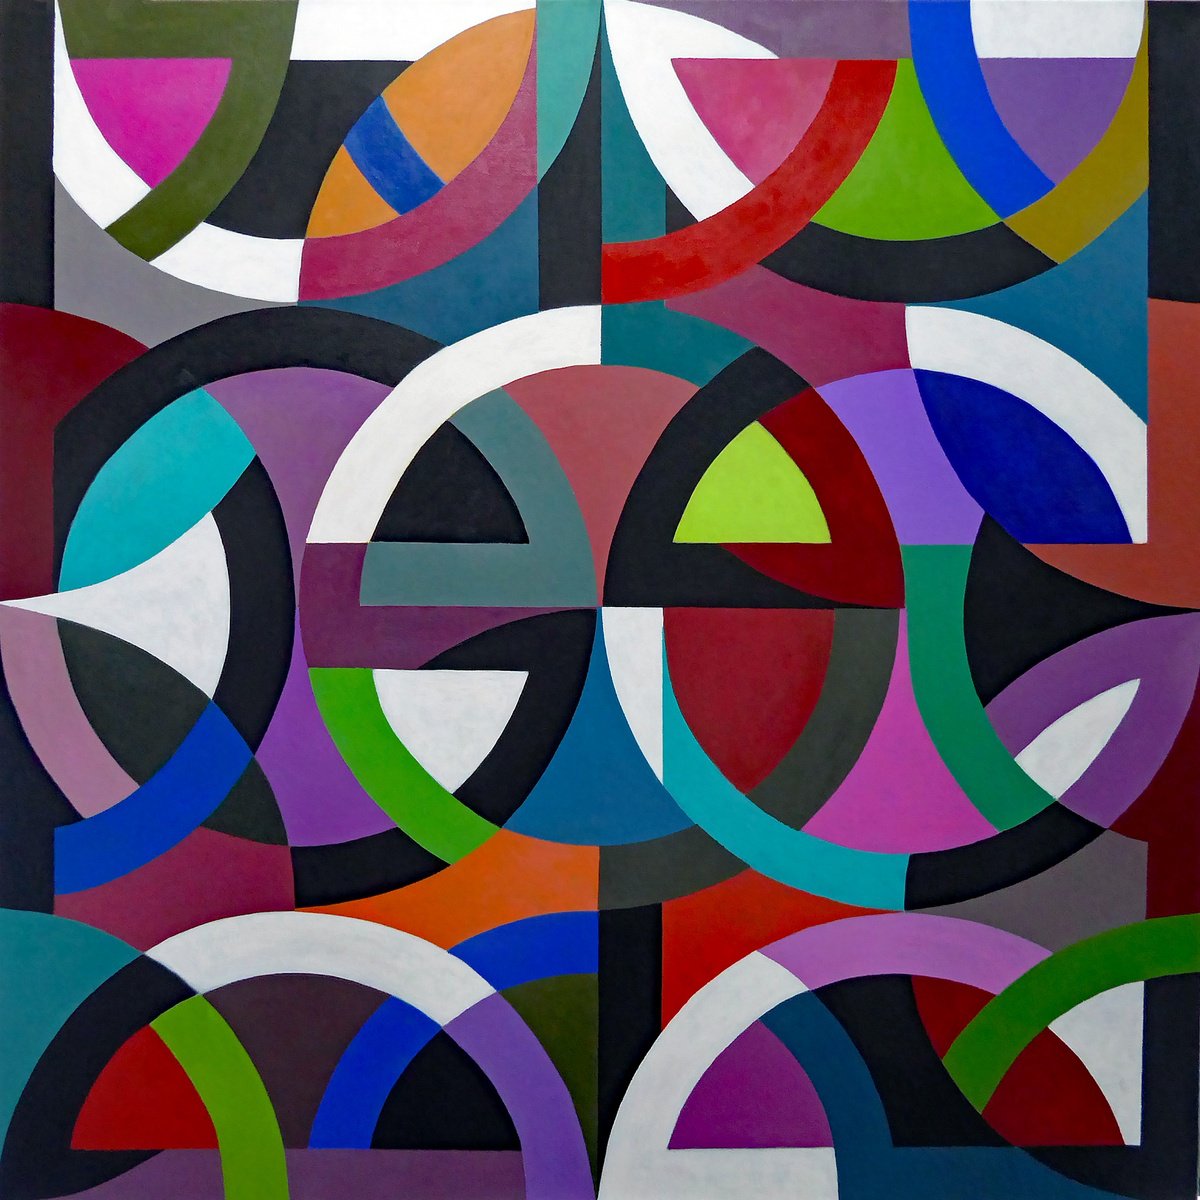 LARGE COMPOSITION: INTERPLAY OF SHAPES by Stephen Conroy